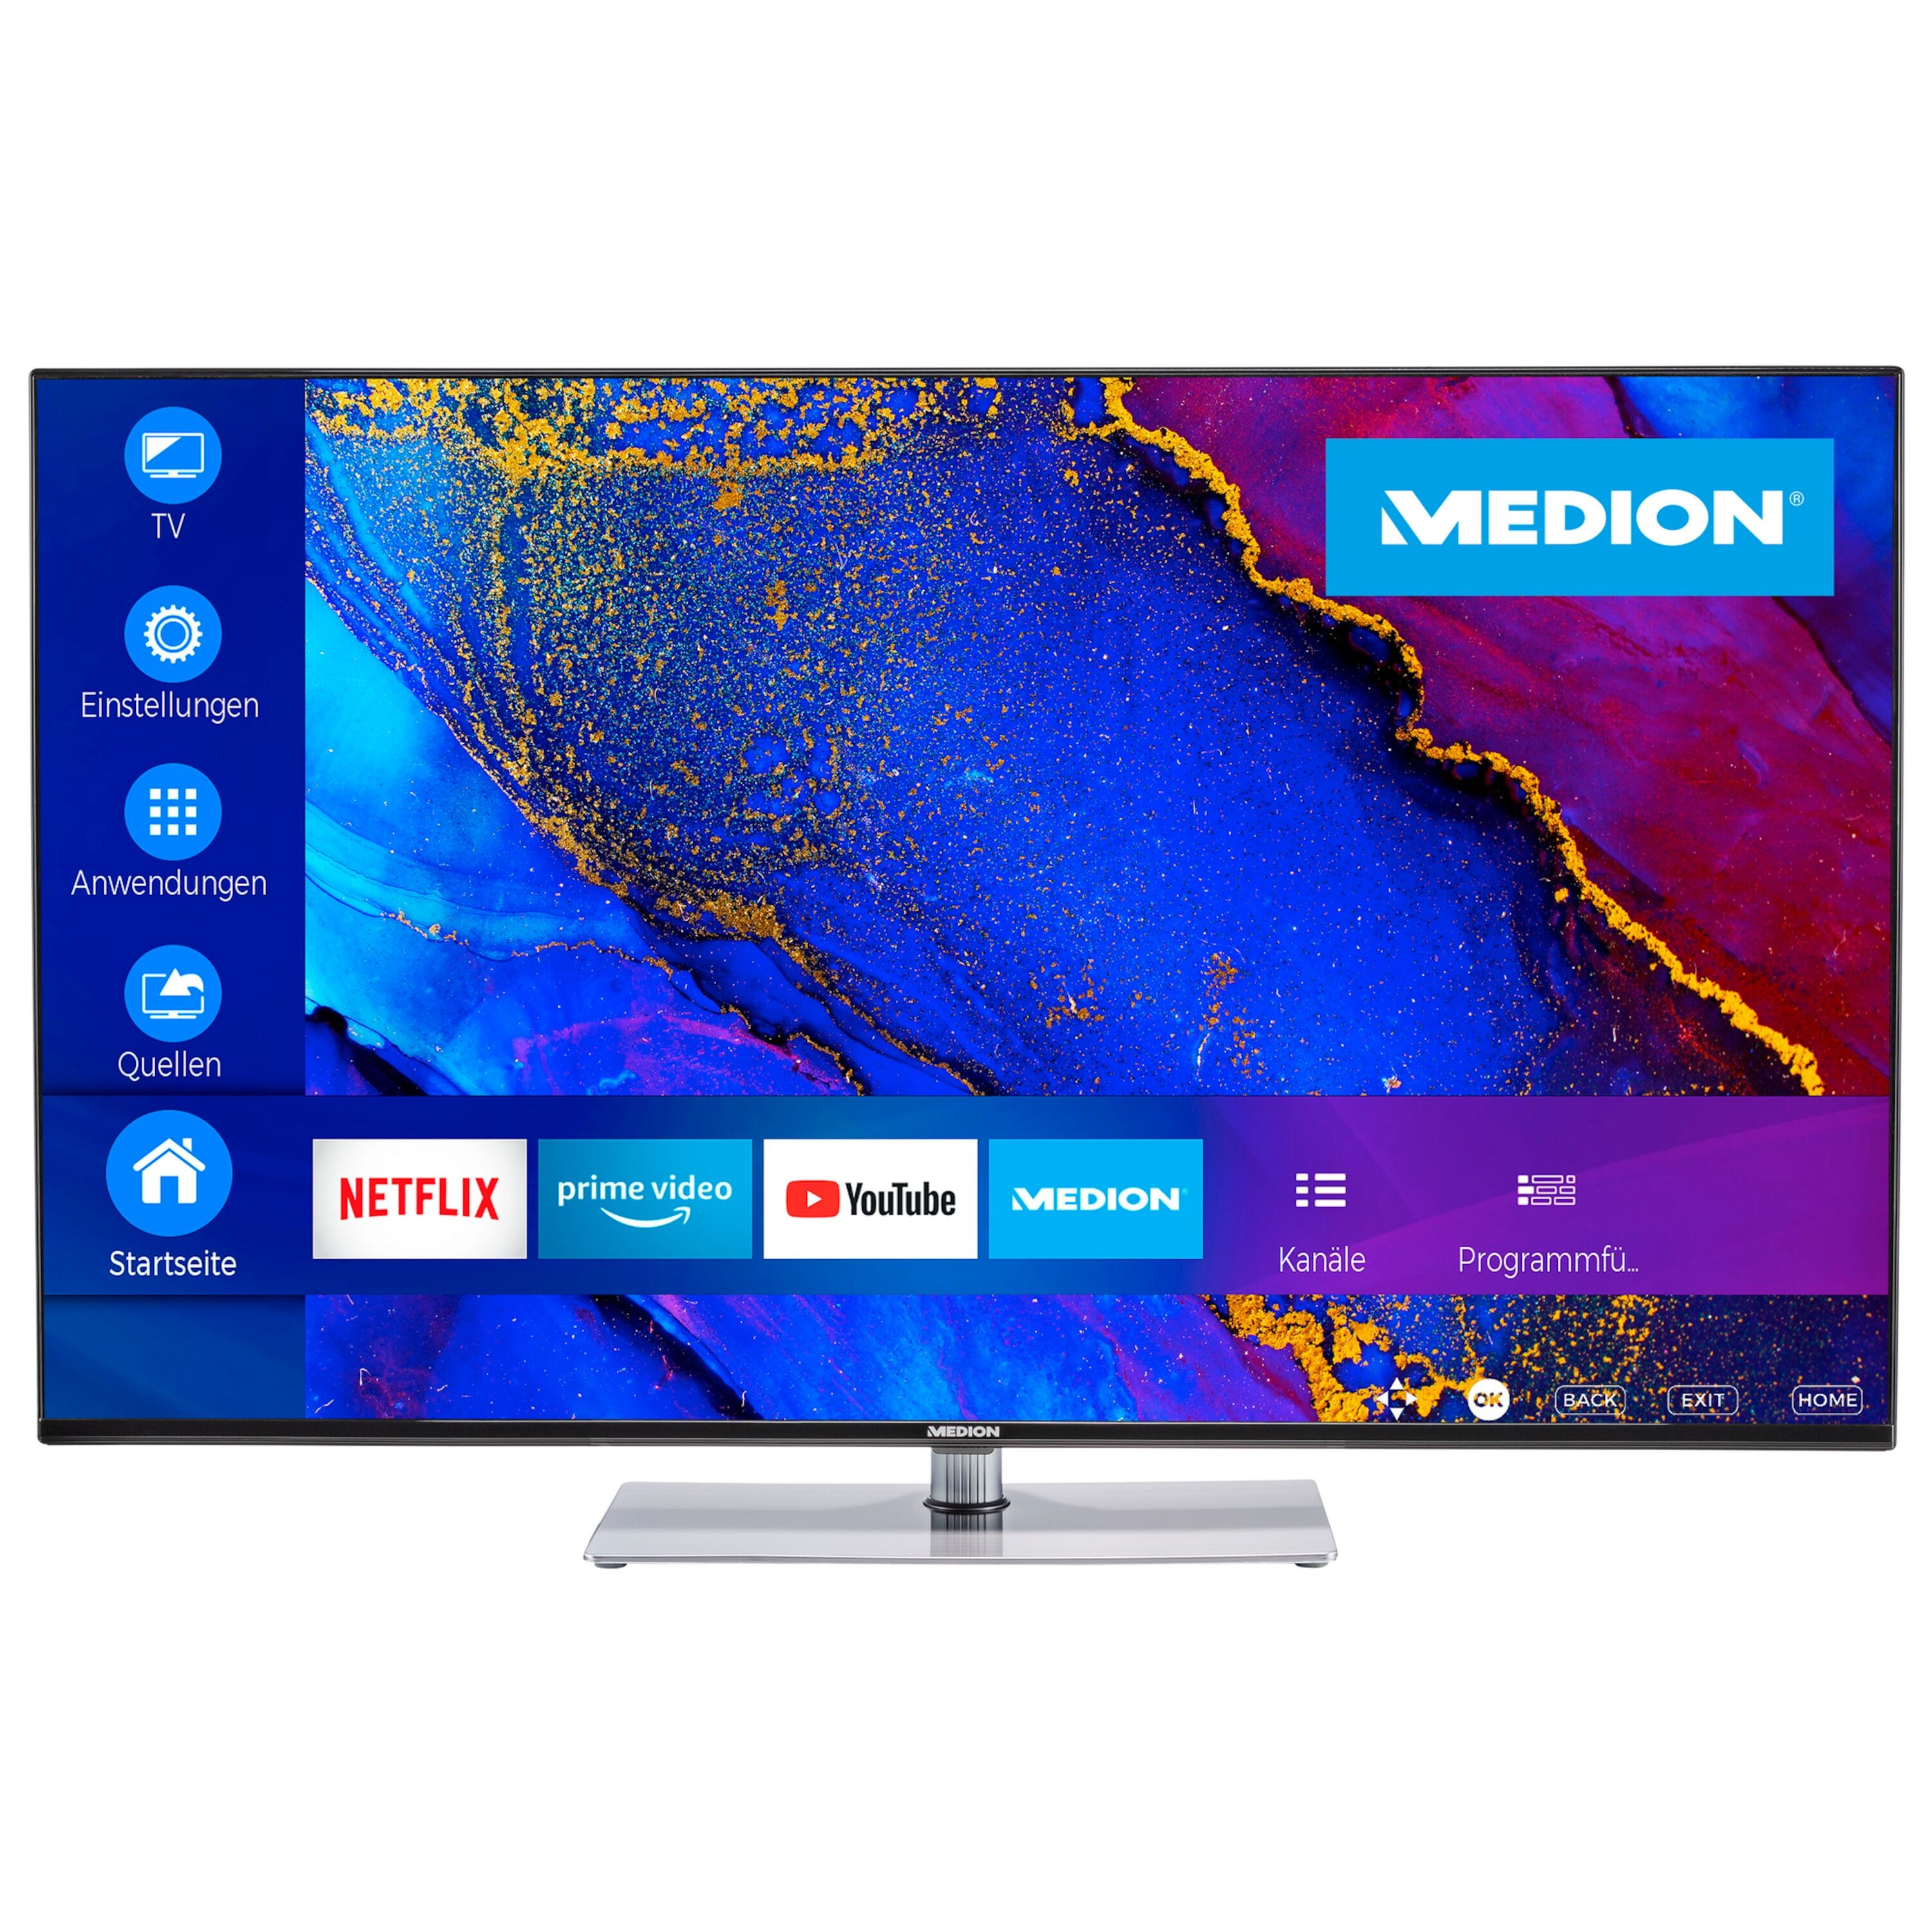 MEDION MEDION® LIFE X14312 Smart-TV 108 cm (43 pouces) Ultra HD Display HDR Dolby Vision Micro Dimming MEMC PVR ready Netflix Amazon